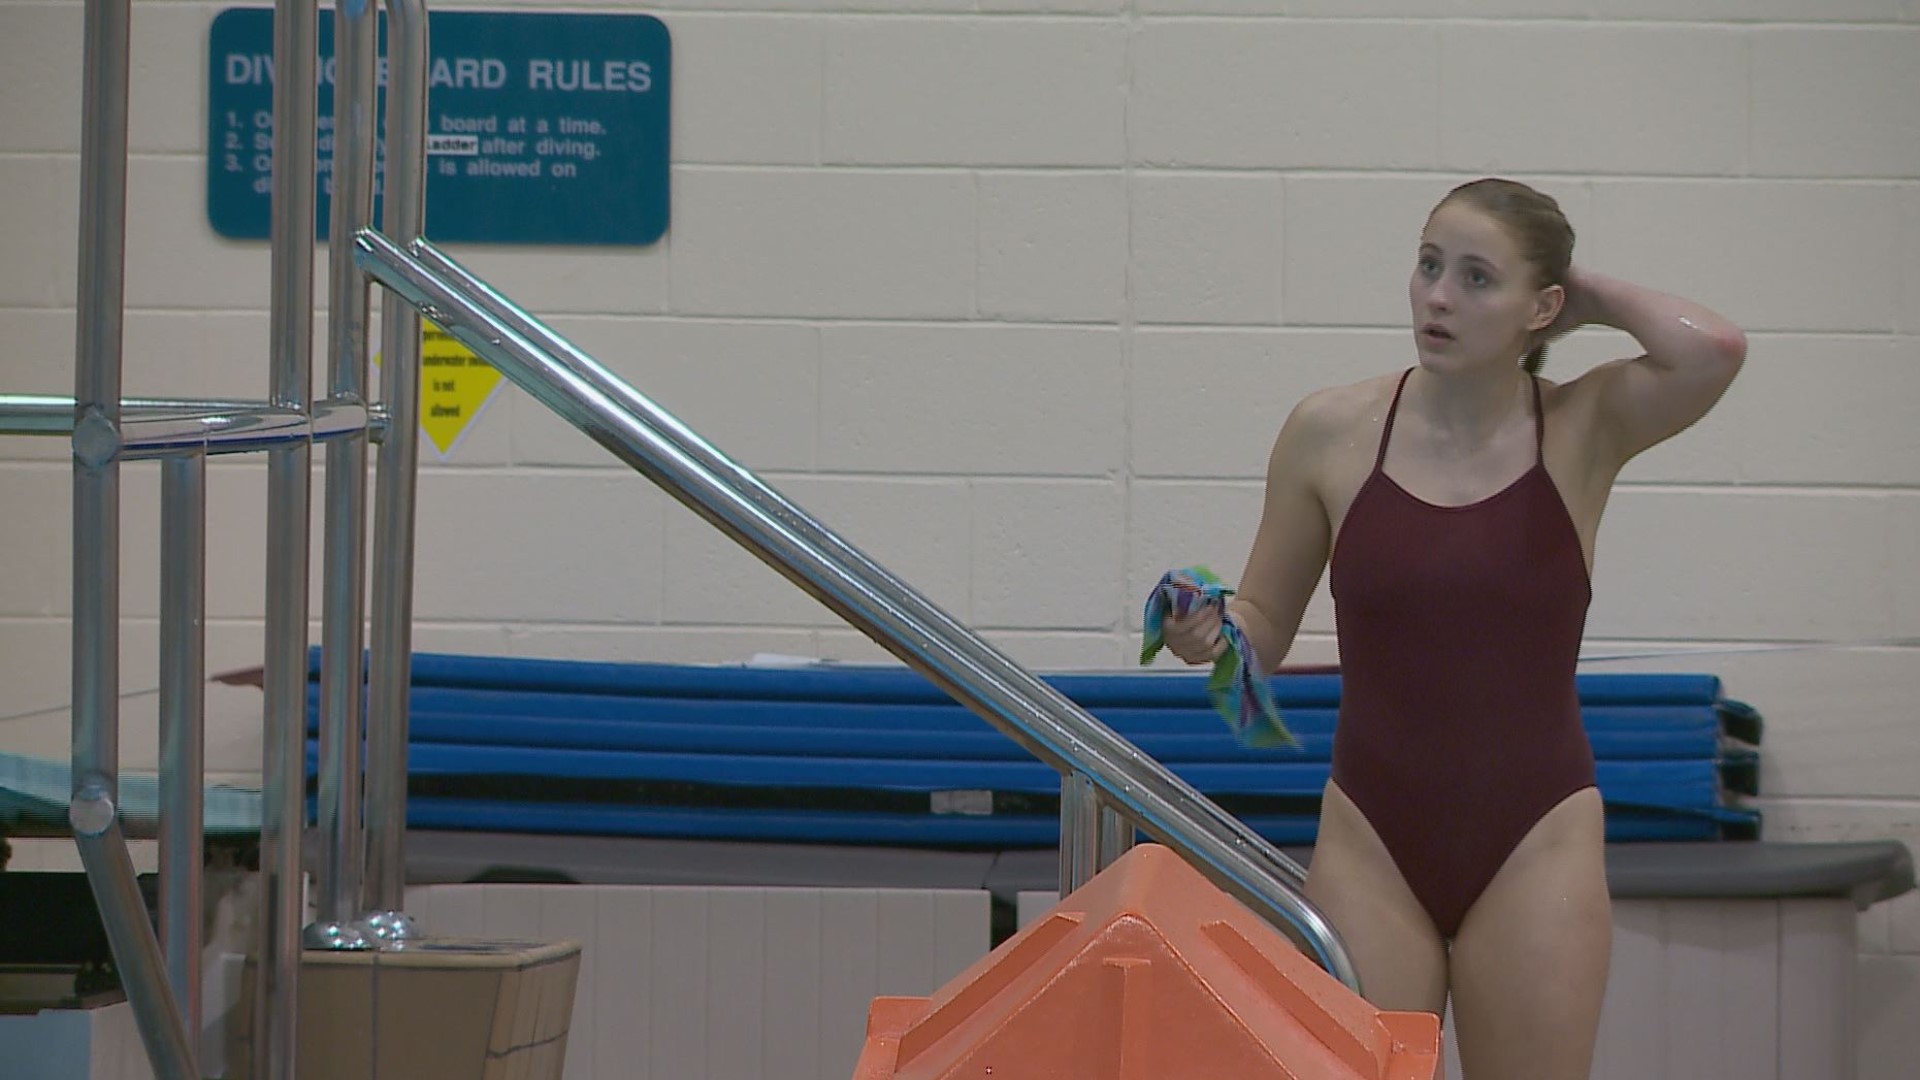 Francella is a two-time state champion in the 1 meter springboard. She is taking aim at number three.